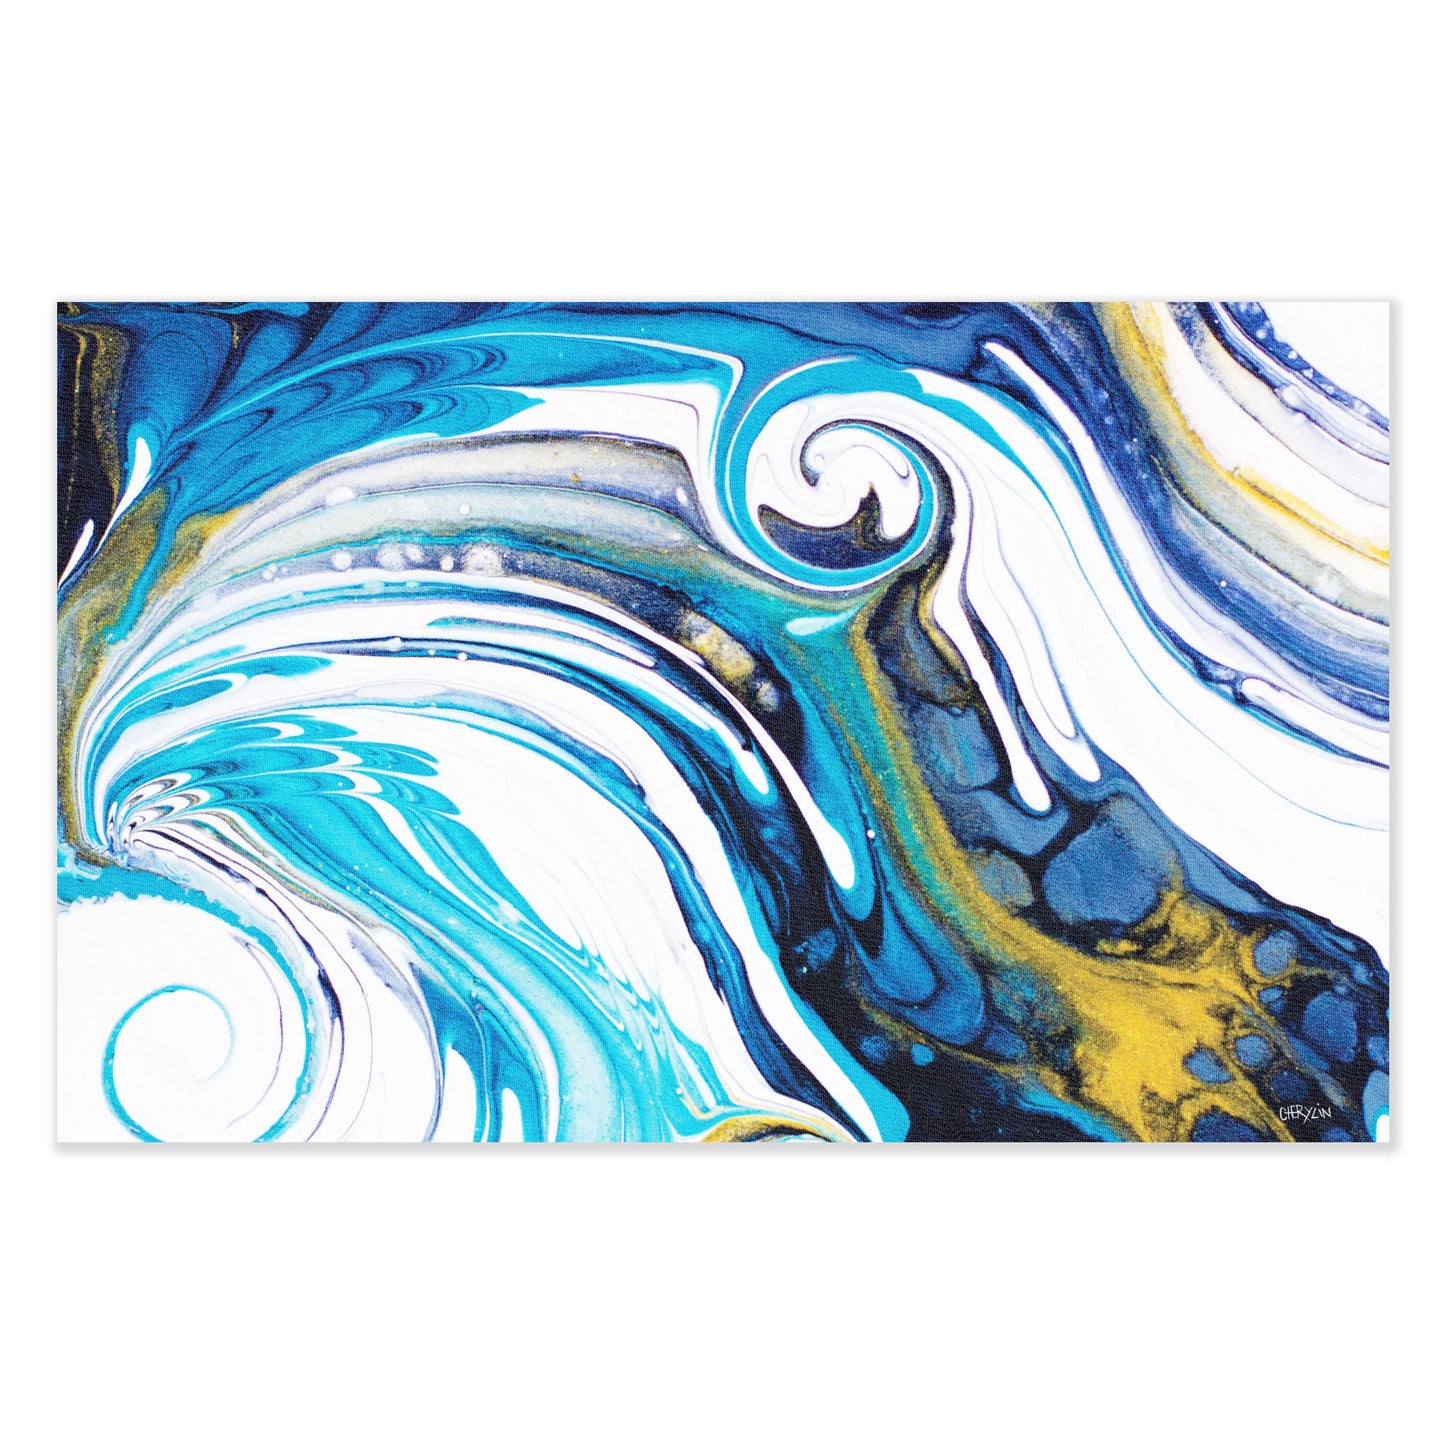 Blue Abstract Waves Table Net Cover by Cherylin Louw